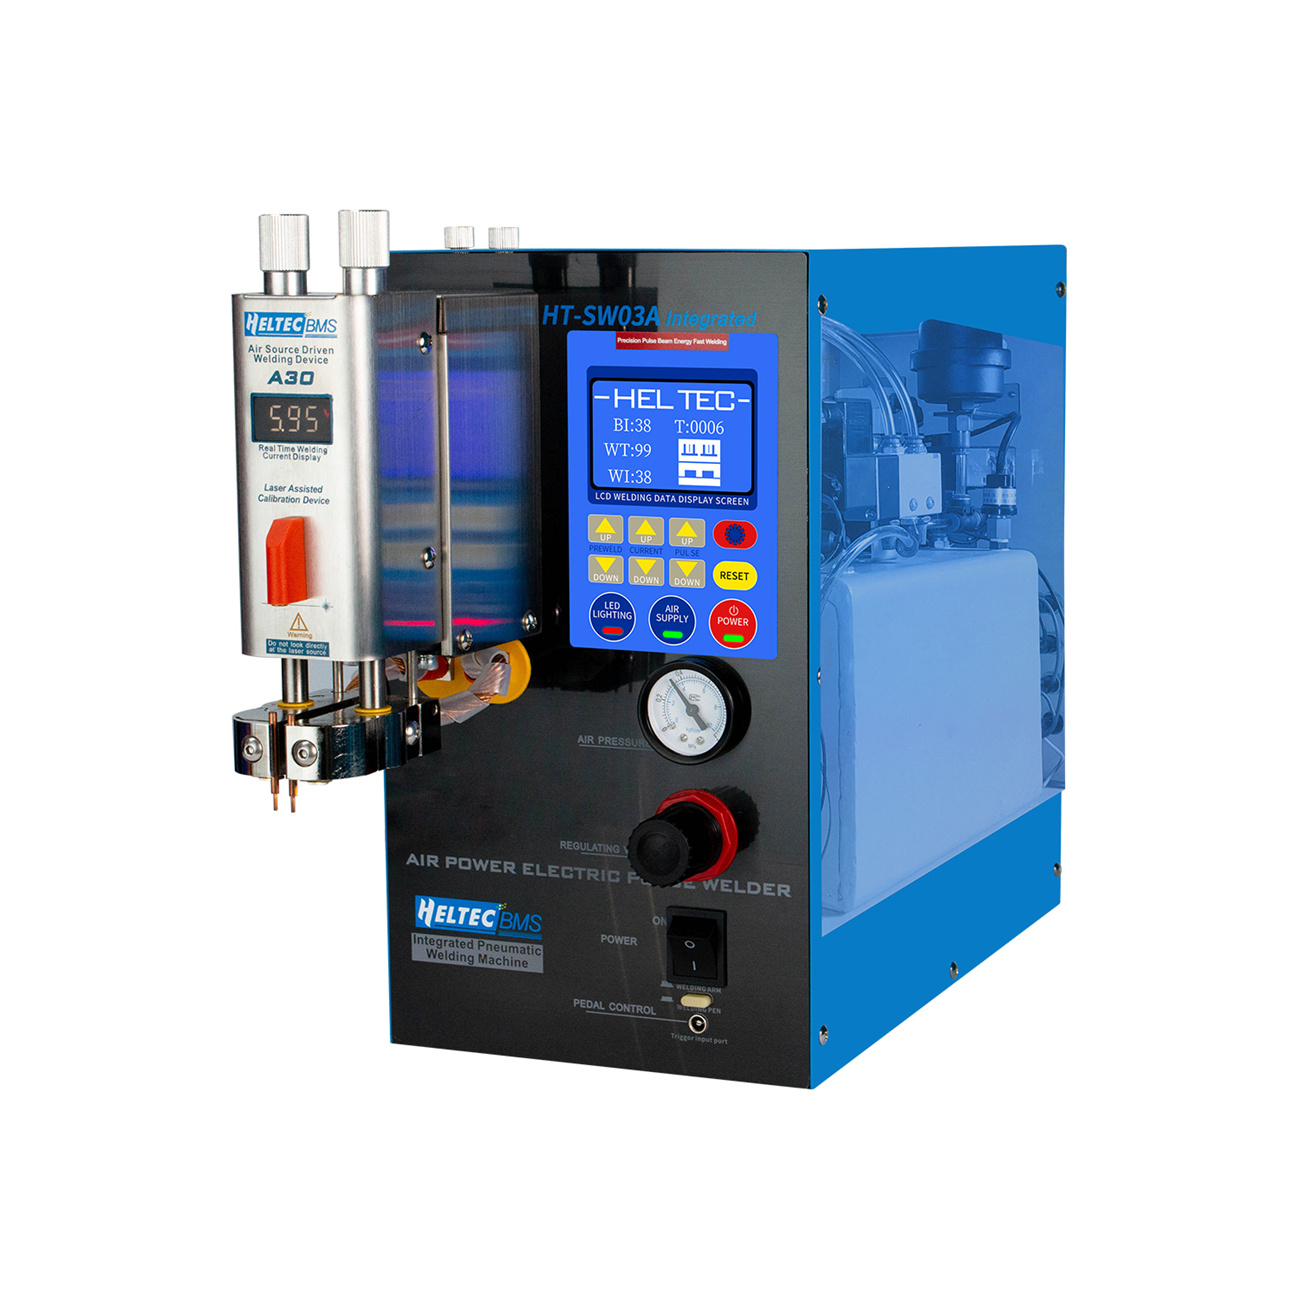 Pneumatic Spot Welding Machine with Built-in Air Compressor Featured Image